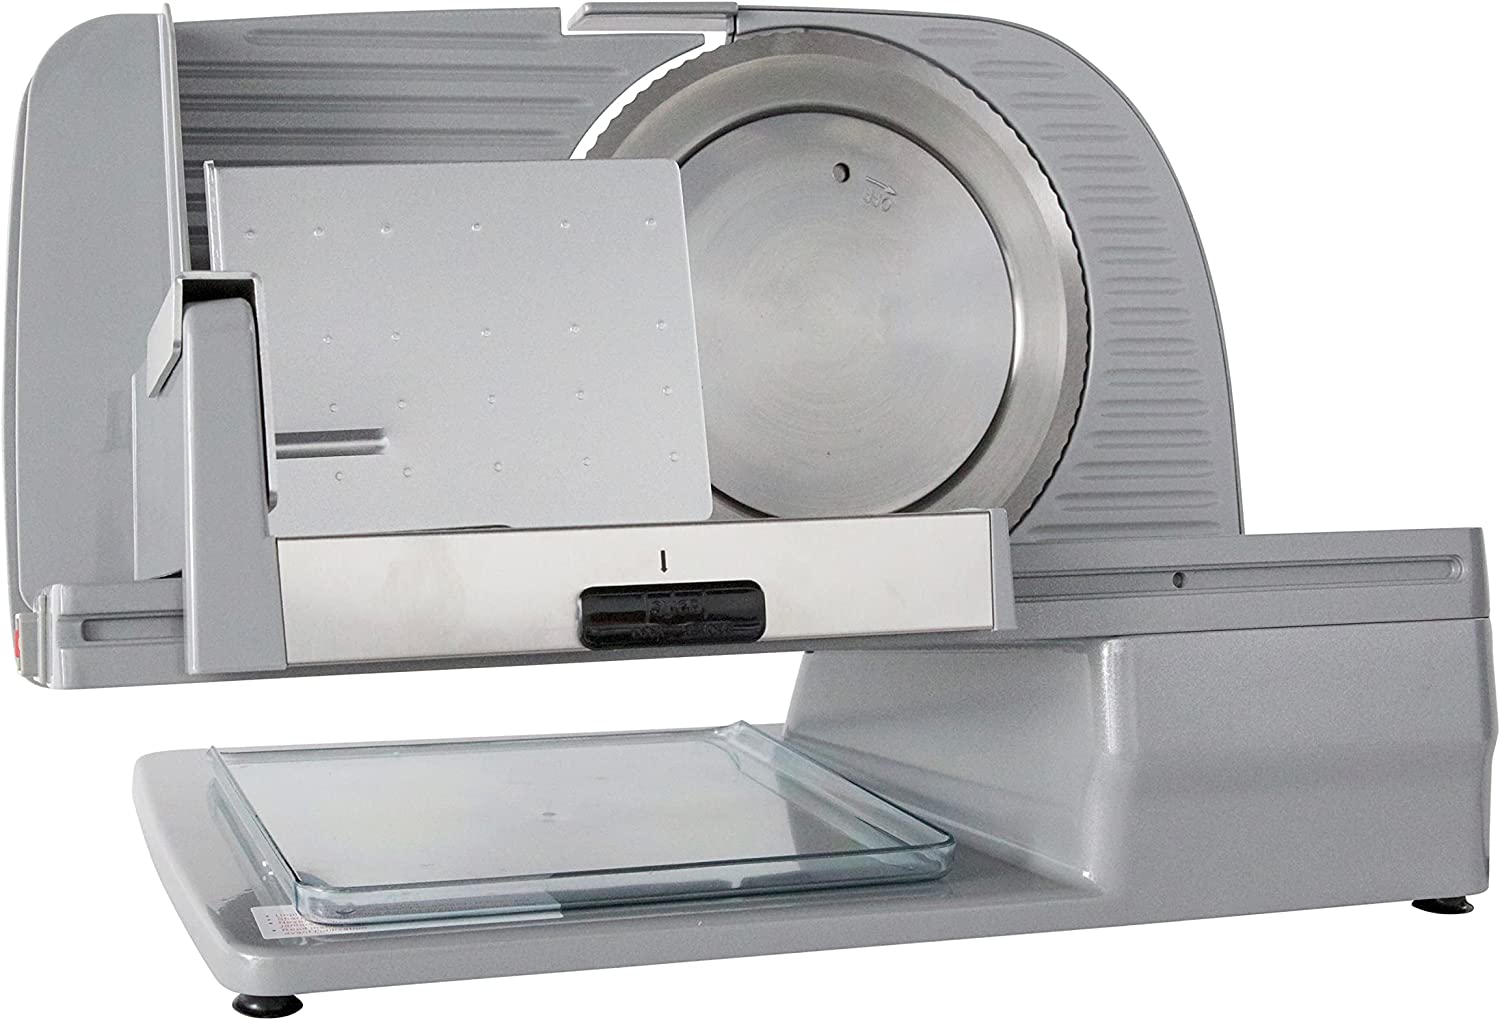 Chef’sChoice Deli-Thin Easy Clean Meat Slicer